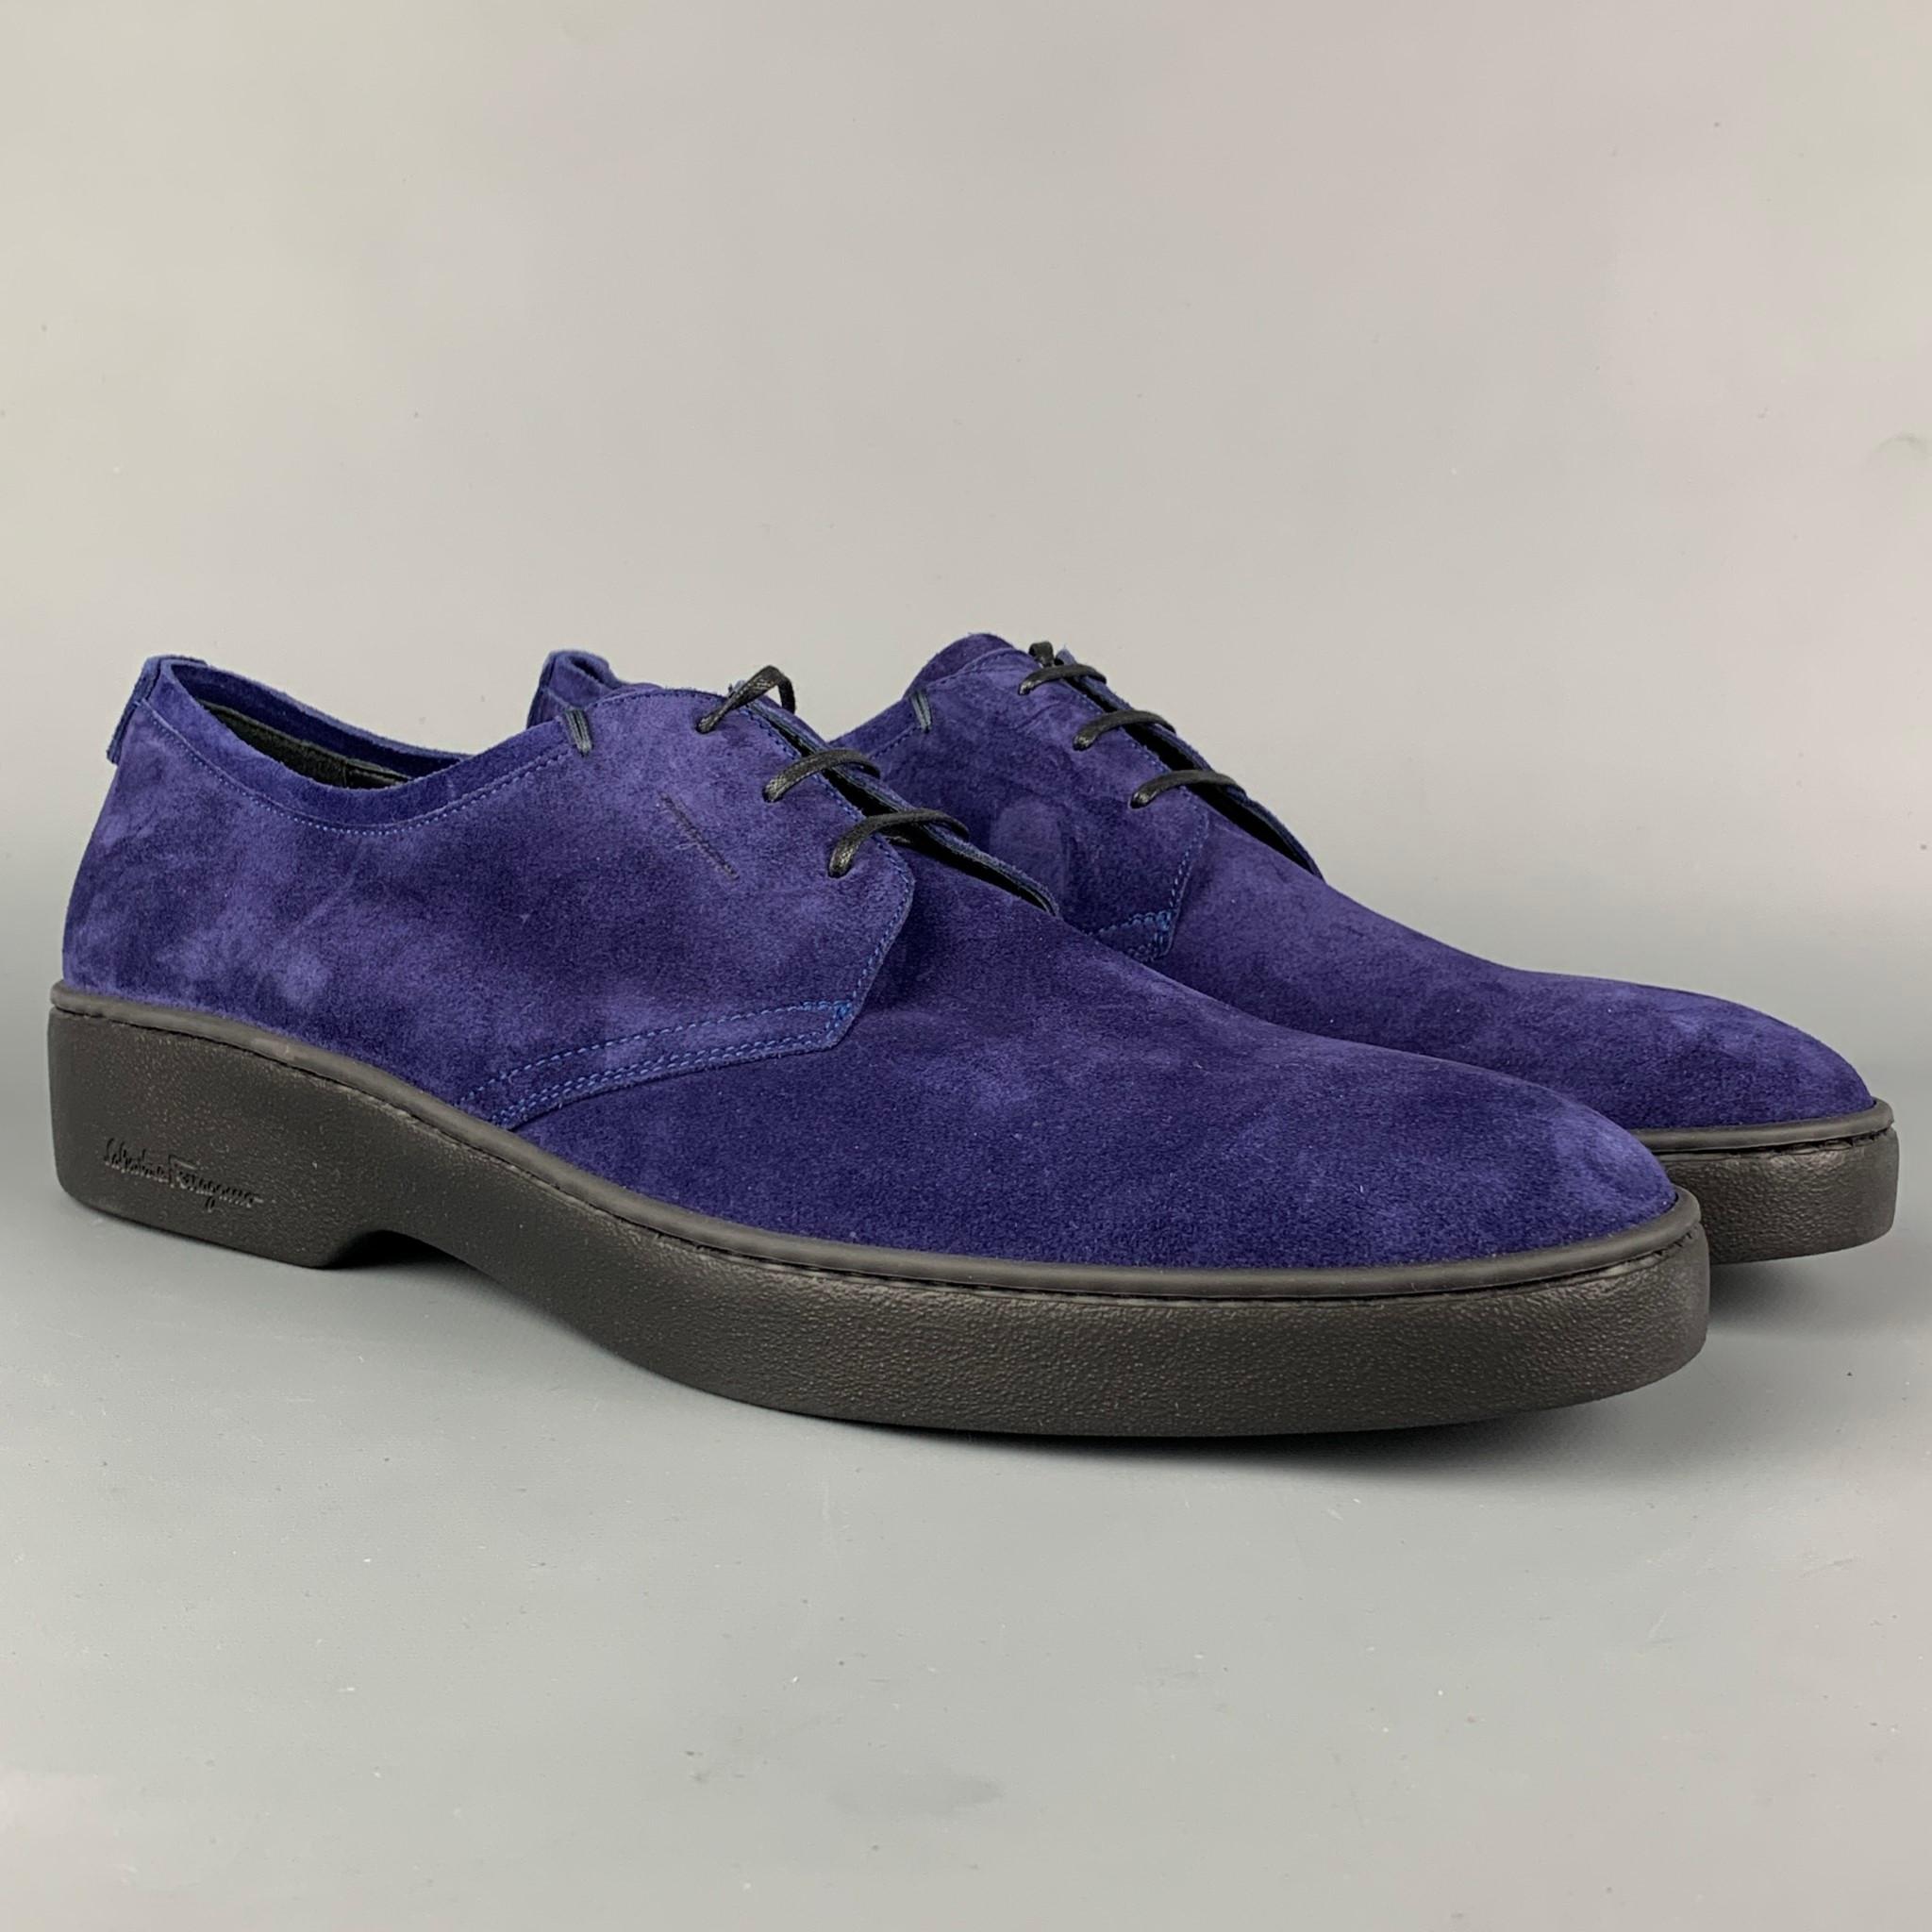 SALVATORE FERRAGAMO shoes comes in a purple suede featuring a rubber sole and a lace up closure. Made in Italy. 

Excellent Pre-Owned Condition.
Marked: LC 51173 10 D

Outsole: 12.25 in. x 4 in. 